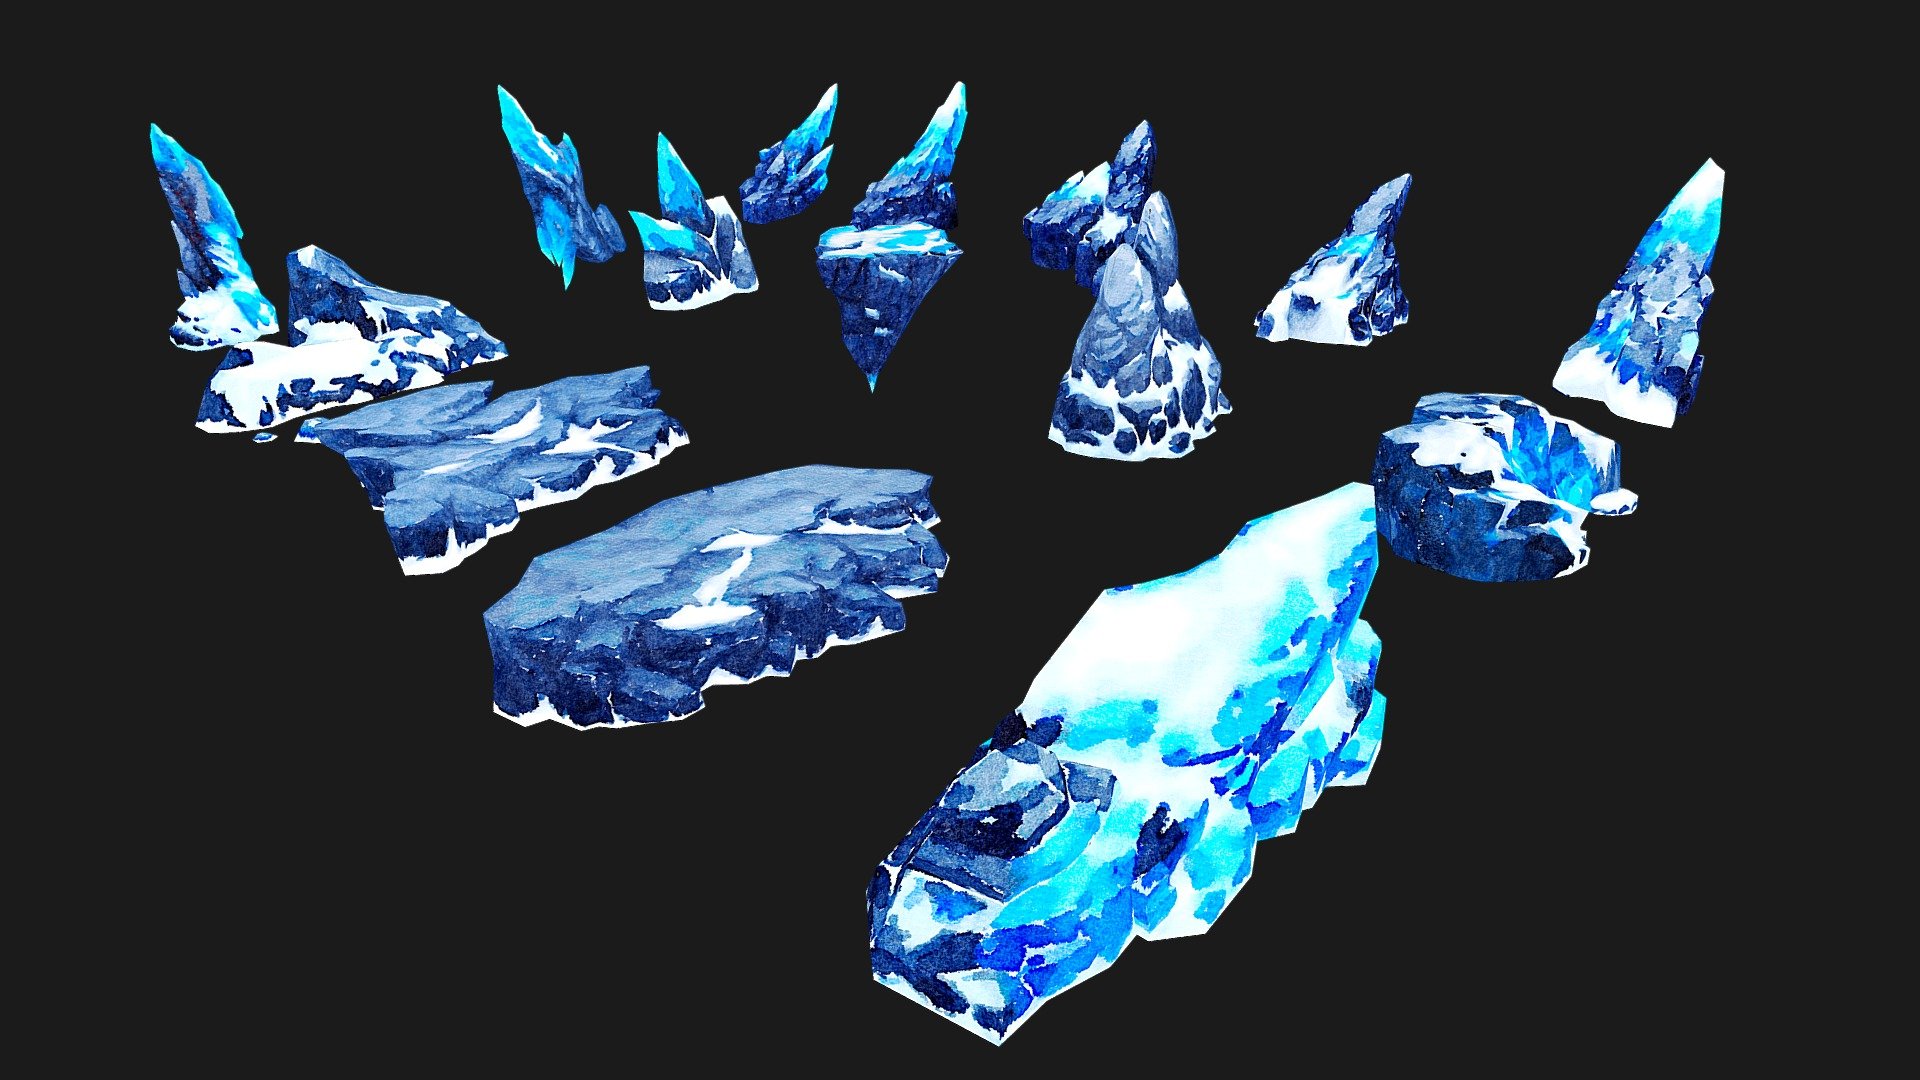 A package of low polygonal Rocks.The package contains 15 objects

Rock 1: 456 Poly, 307 Vert
Rock 2: 259 Poly, 213 Vert
Rock 3: 238 Poly, 193 Vert
Rock 4: 155 Poly, 151 Vert
Rock 5: 194 Poly, 176 Vert
Rock 6: 441 Poly, 238 Vert
Rock 7: 283 Poly, 208 Vert
Rock 8: 238 Poly, 150 Vert
Rock 9: 171 Poly, 124 Vert
Rock 10: 316 Poly, 211 Vert
Rock 11: 154 Poly, 135 Vert
Rock 12: 224 Poly, 227 Vert
Rock 13: 241 Poly, 208 Vert
Rock 14: 162 Poly, 154 Vert
Rock 15: 243 Poly, 215 Vert




Only Textures Diffus duplicated in resolution 1024 x 1024. Format textures of PNG. Files include: 3Dsmax, 3Ds, Obj, Fbx and folder with textures. Ready import to game project (Unity, Unreal)
If there is a need for any type of model, send a message! We will provide. 
Thanks for your interest and love! 



Note: Watercolor style illustrations 
It is recommended to use flat lighting or shaderless material - Stone Illustration Collection Part 4 - 3D model by josluat91 3d model